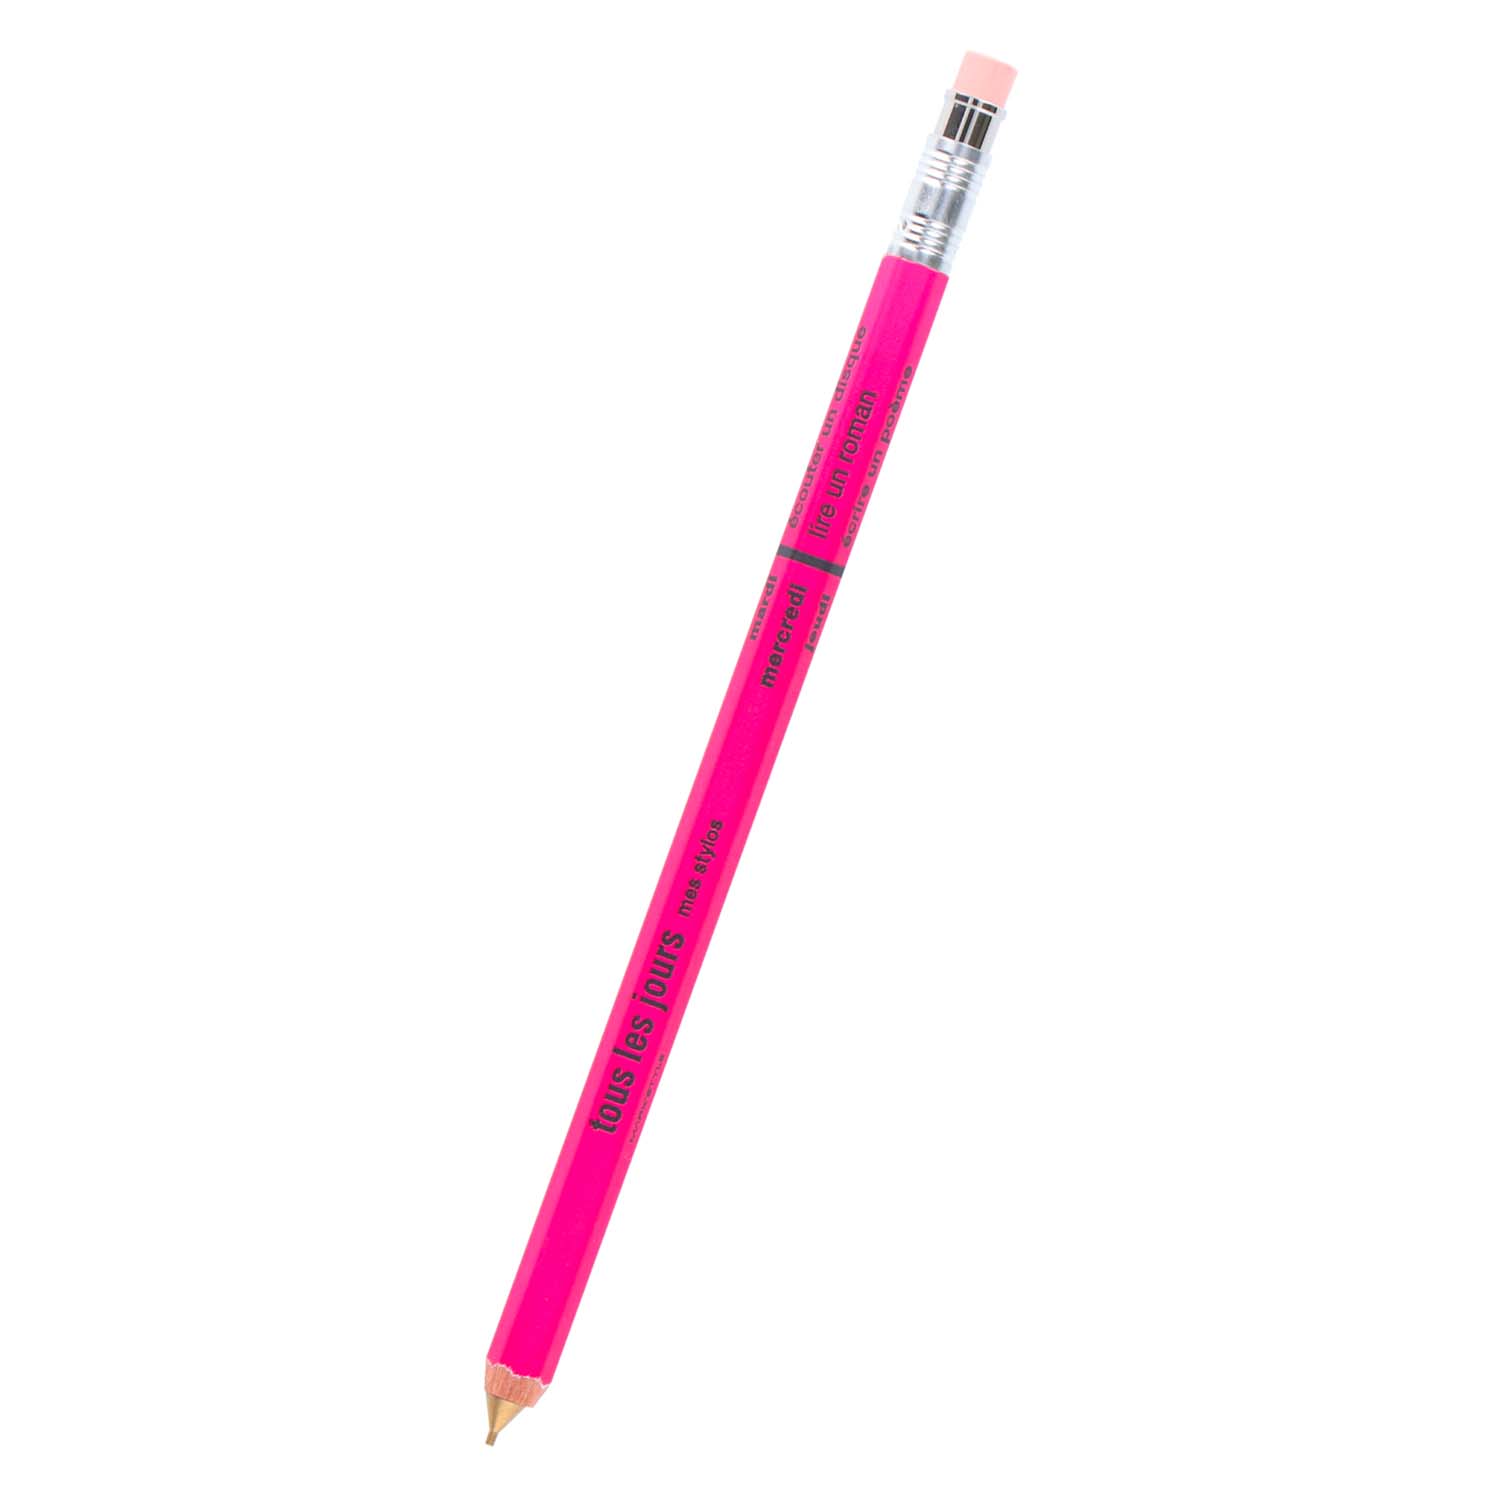 Days Mark's Mechanical Pencil with Eraser DAY-SH1-PK Pink